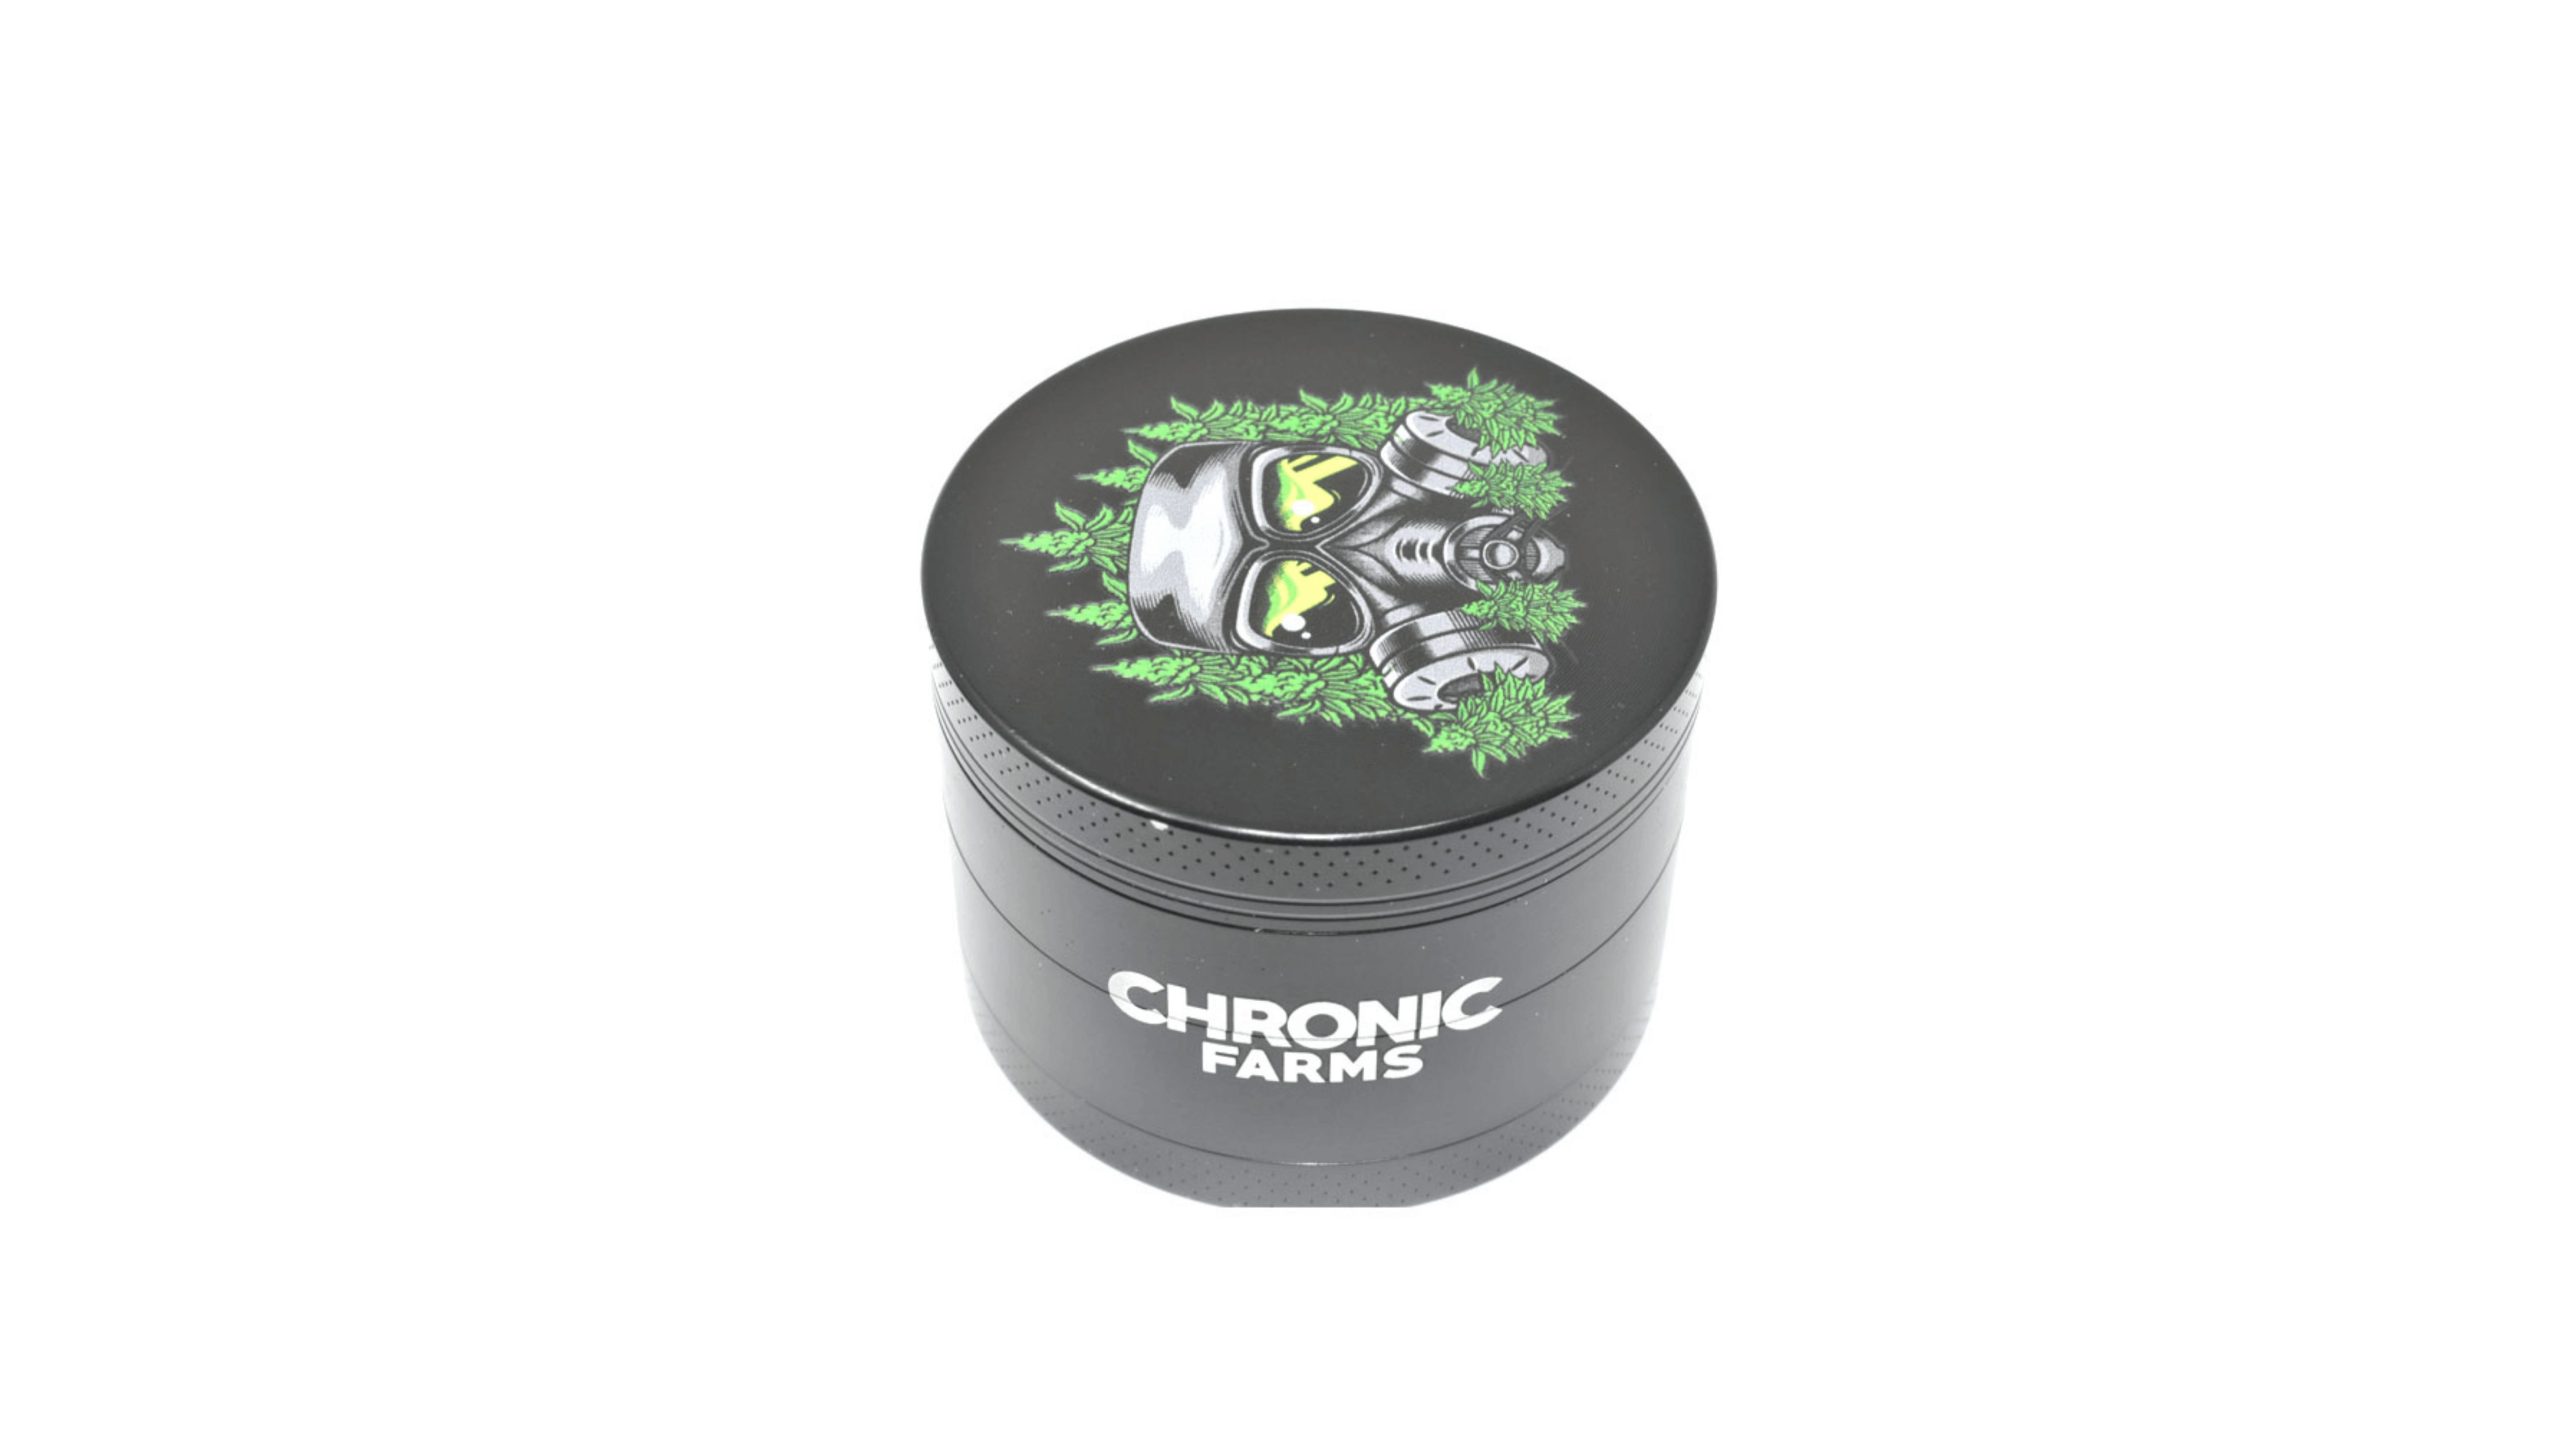 If you're a stoner wanting to learn how to use a grinder for the first time, look no further than the Chronic Farms 4 in 1 Grinder. This is the best purchasing decision you can make to enhance your marijuana game.